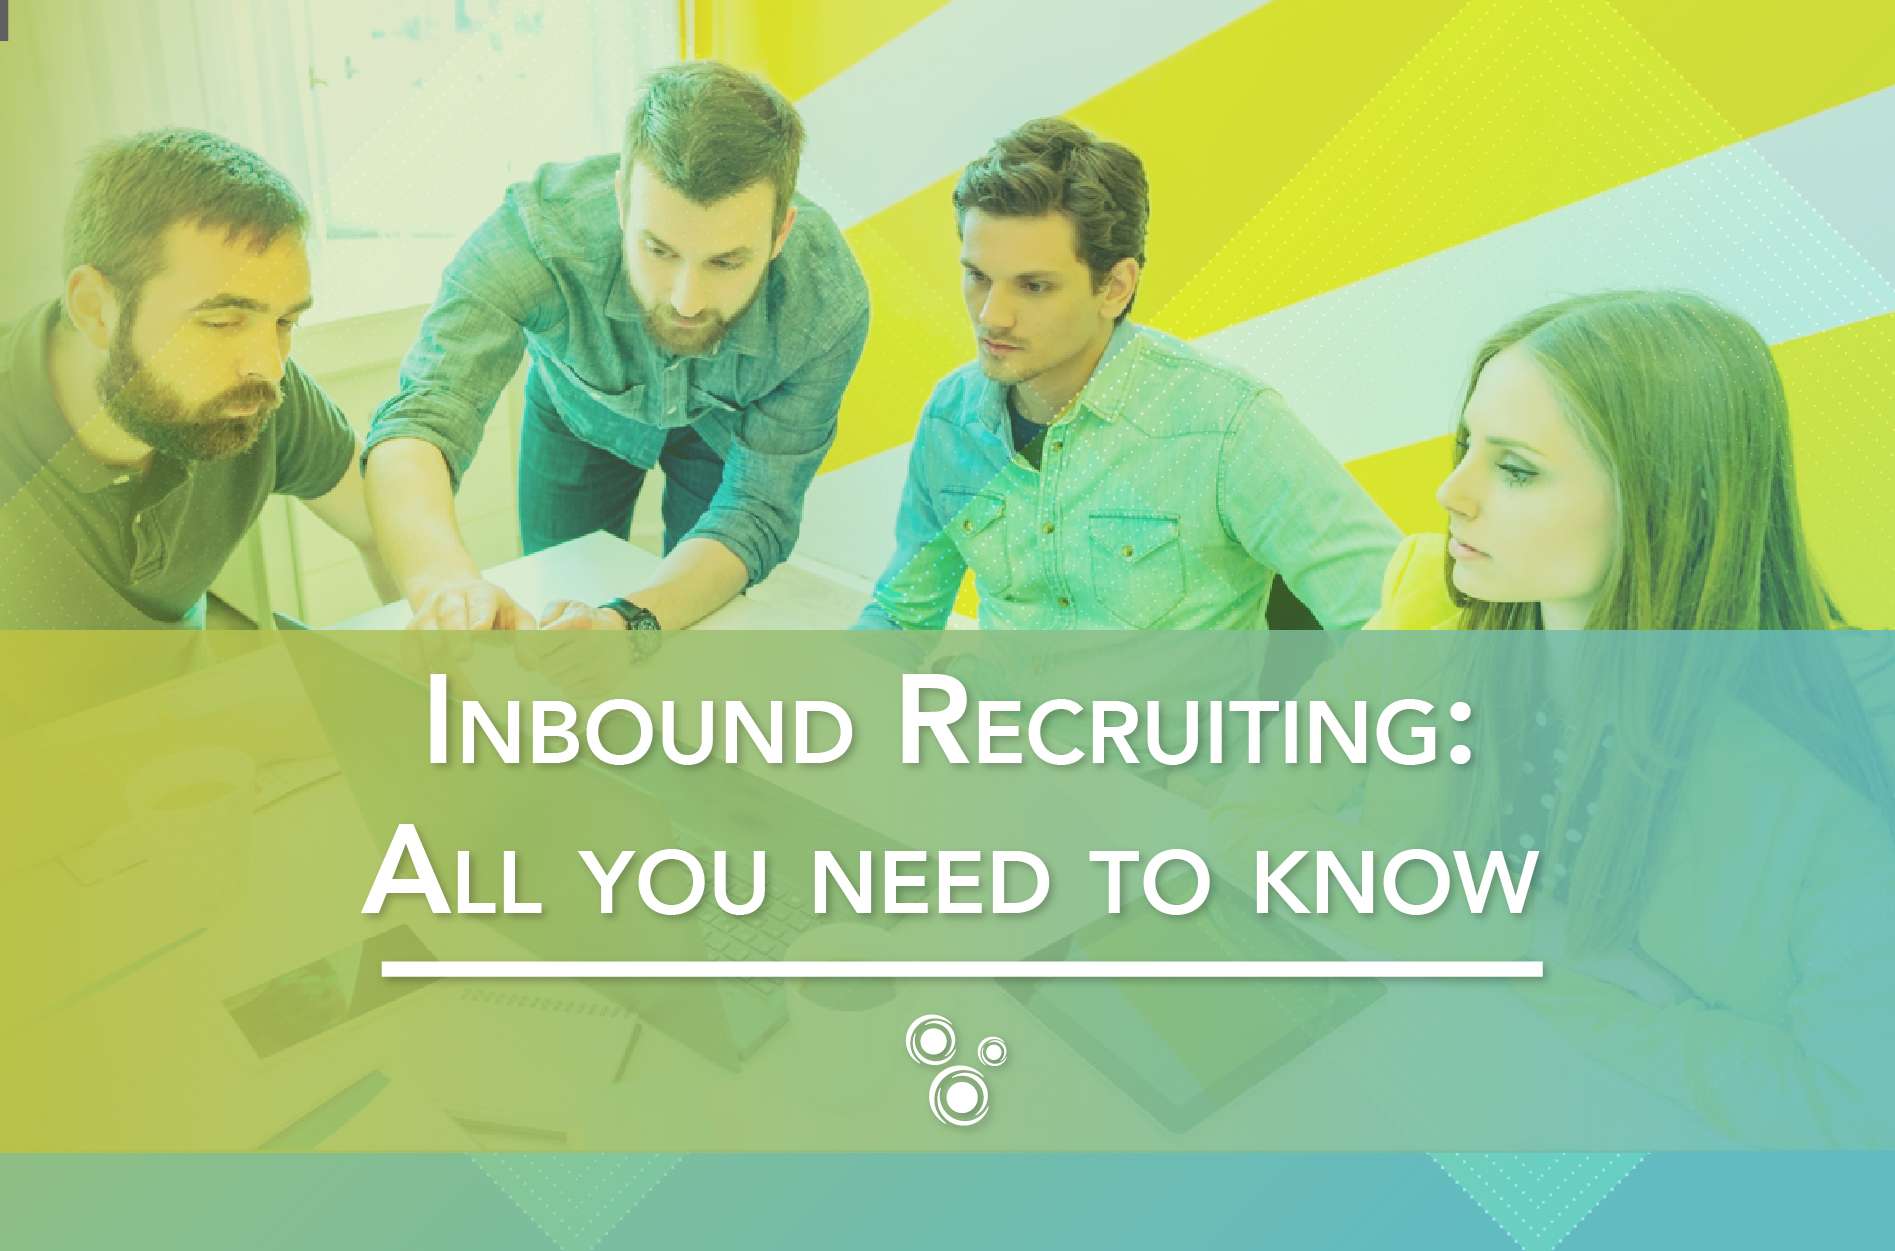 Inbound Recruiting: All you need to know